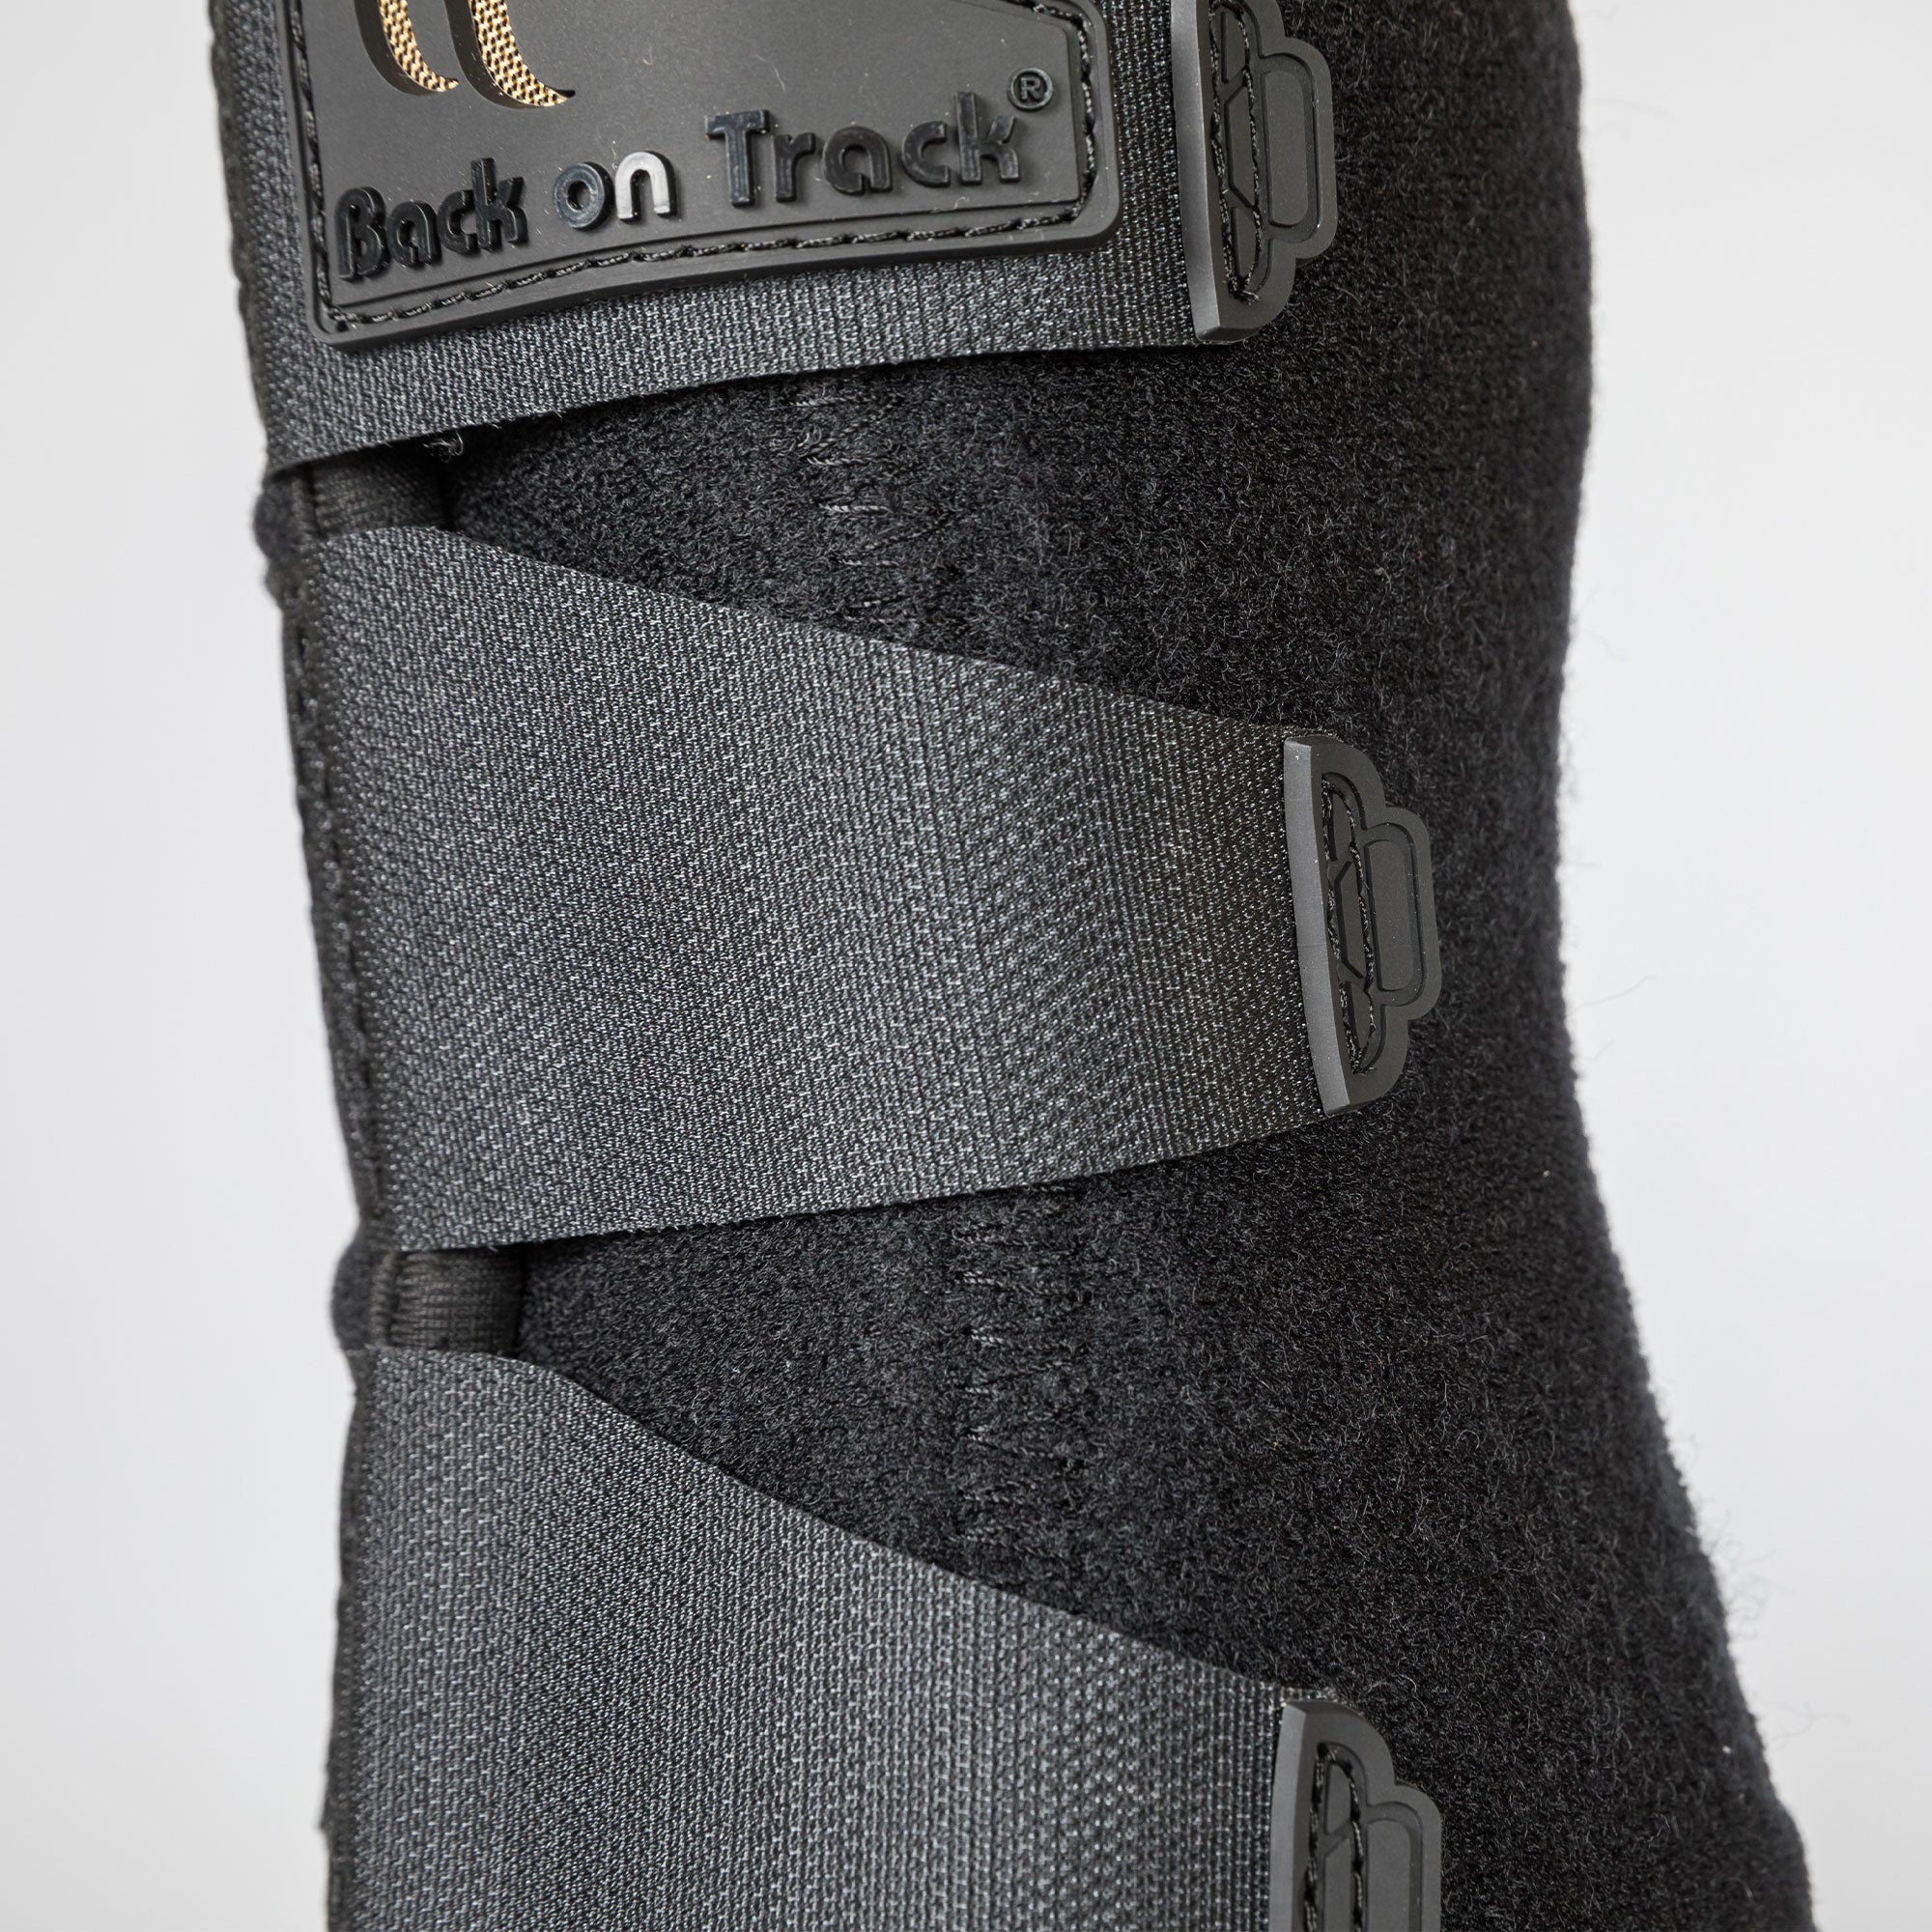 "Airflow" Exercise Boots